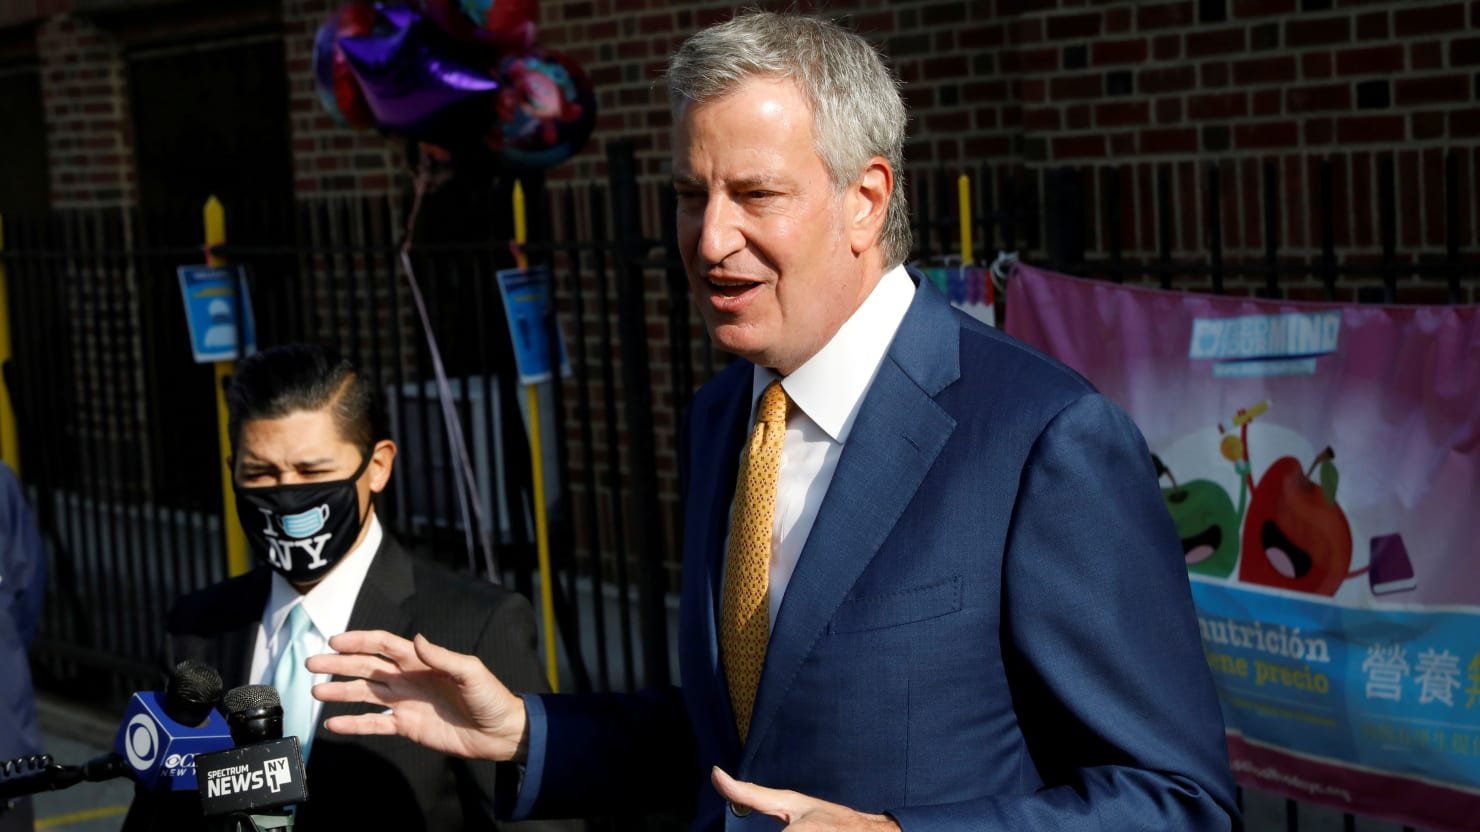 Bill de Blasio Announces All New York City Workers Must Get Vaccinated